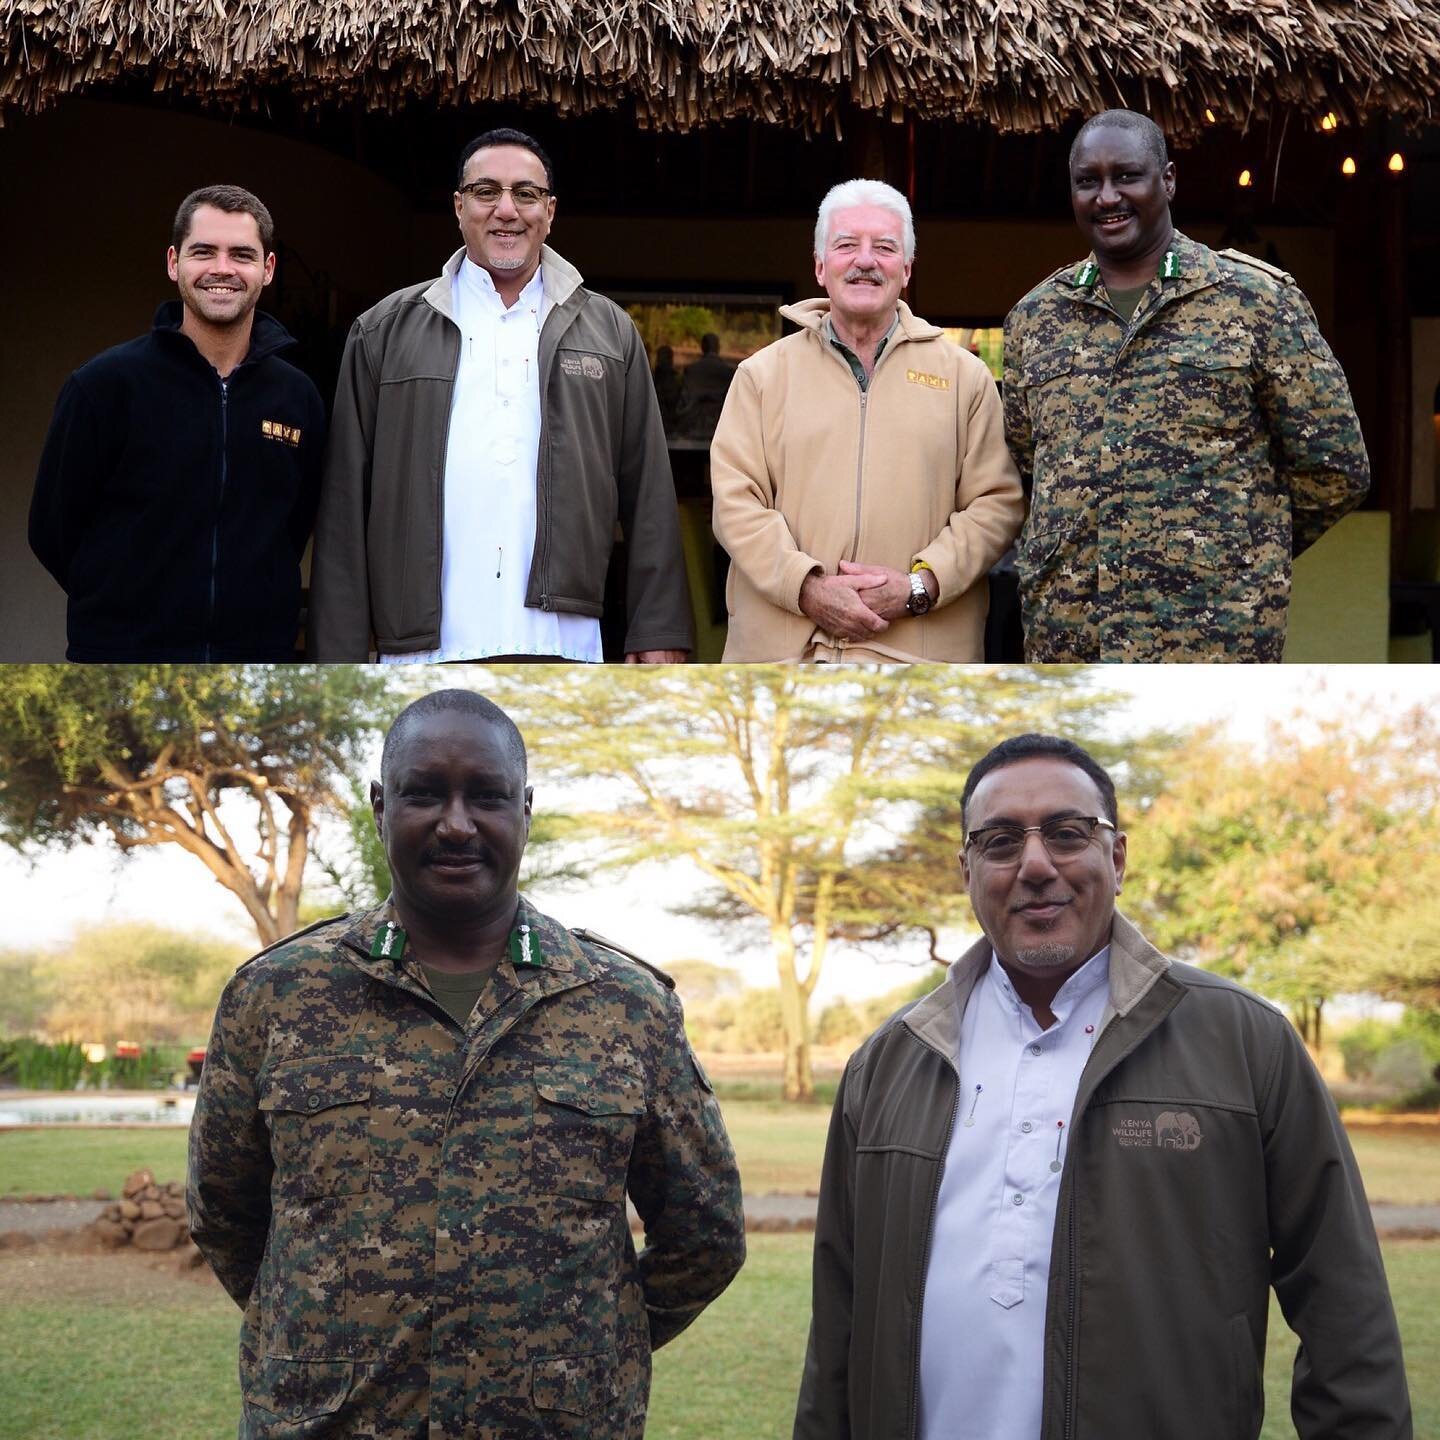 Delighted and honoured to have our Minister of Tourism, Najib Balala and KWS Director General John Waweru staying with us over the weekend 🦁🐘 

__________
www.tawilodge.com
__________

#safari #tourism #amboseli #vistors #karibu #weekend #magicalke